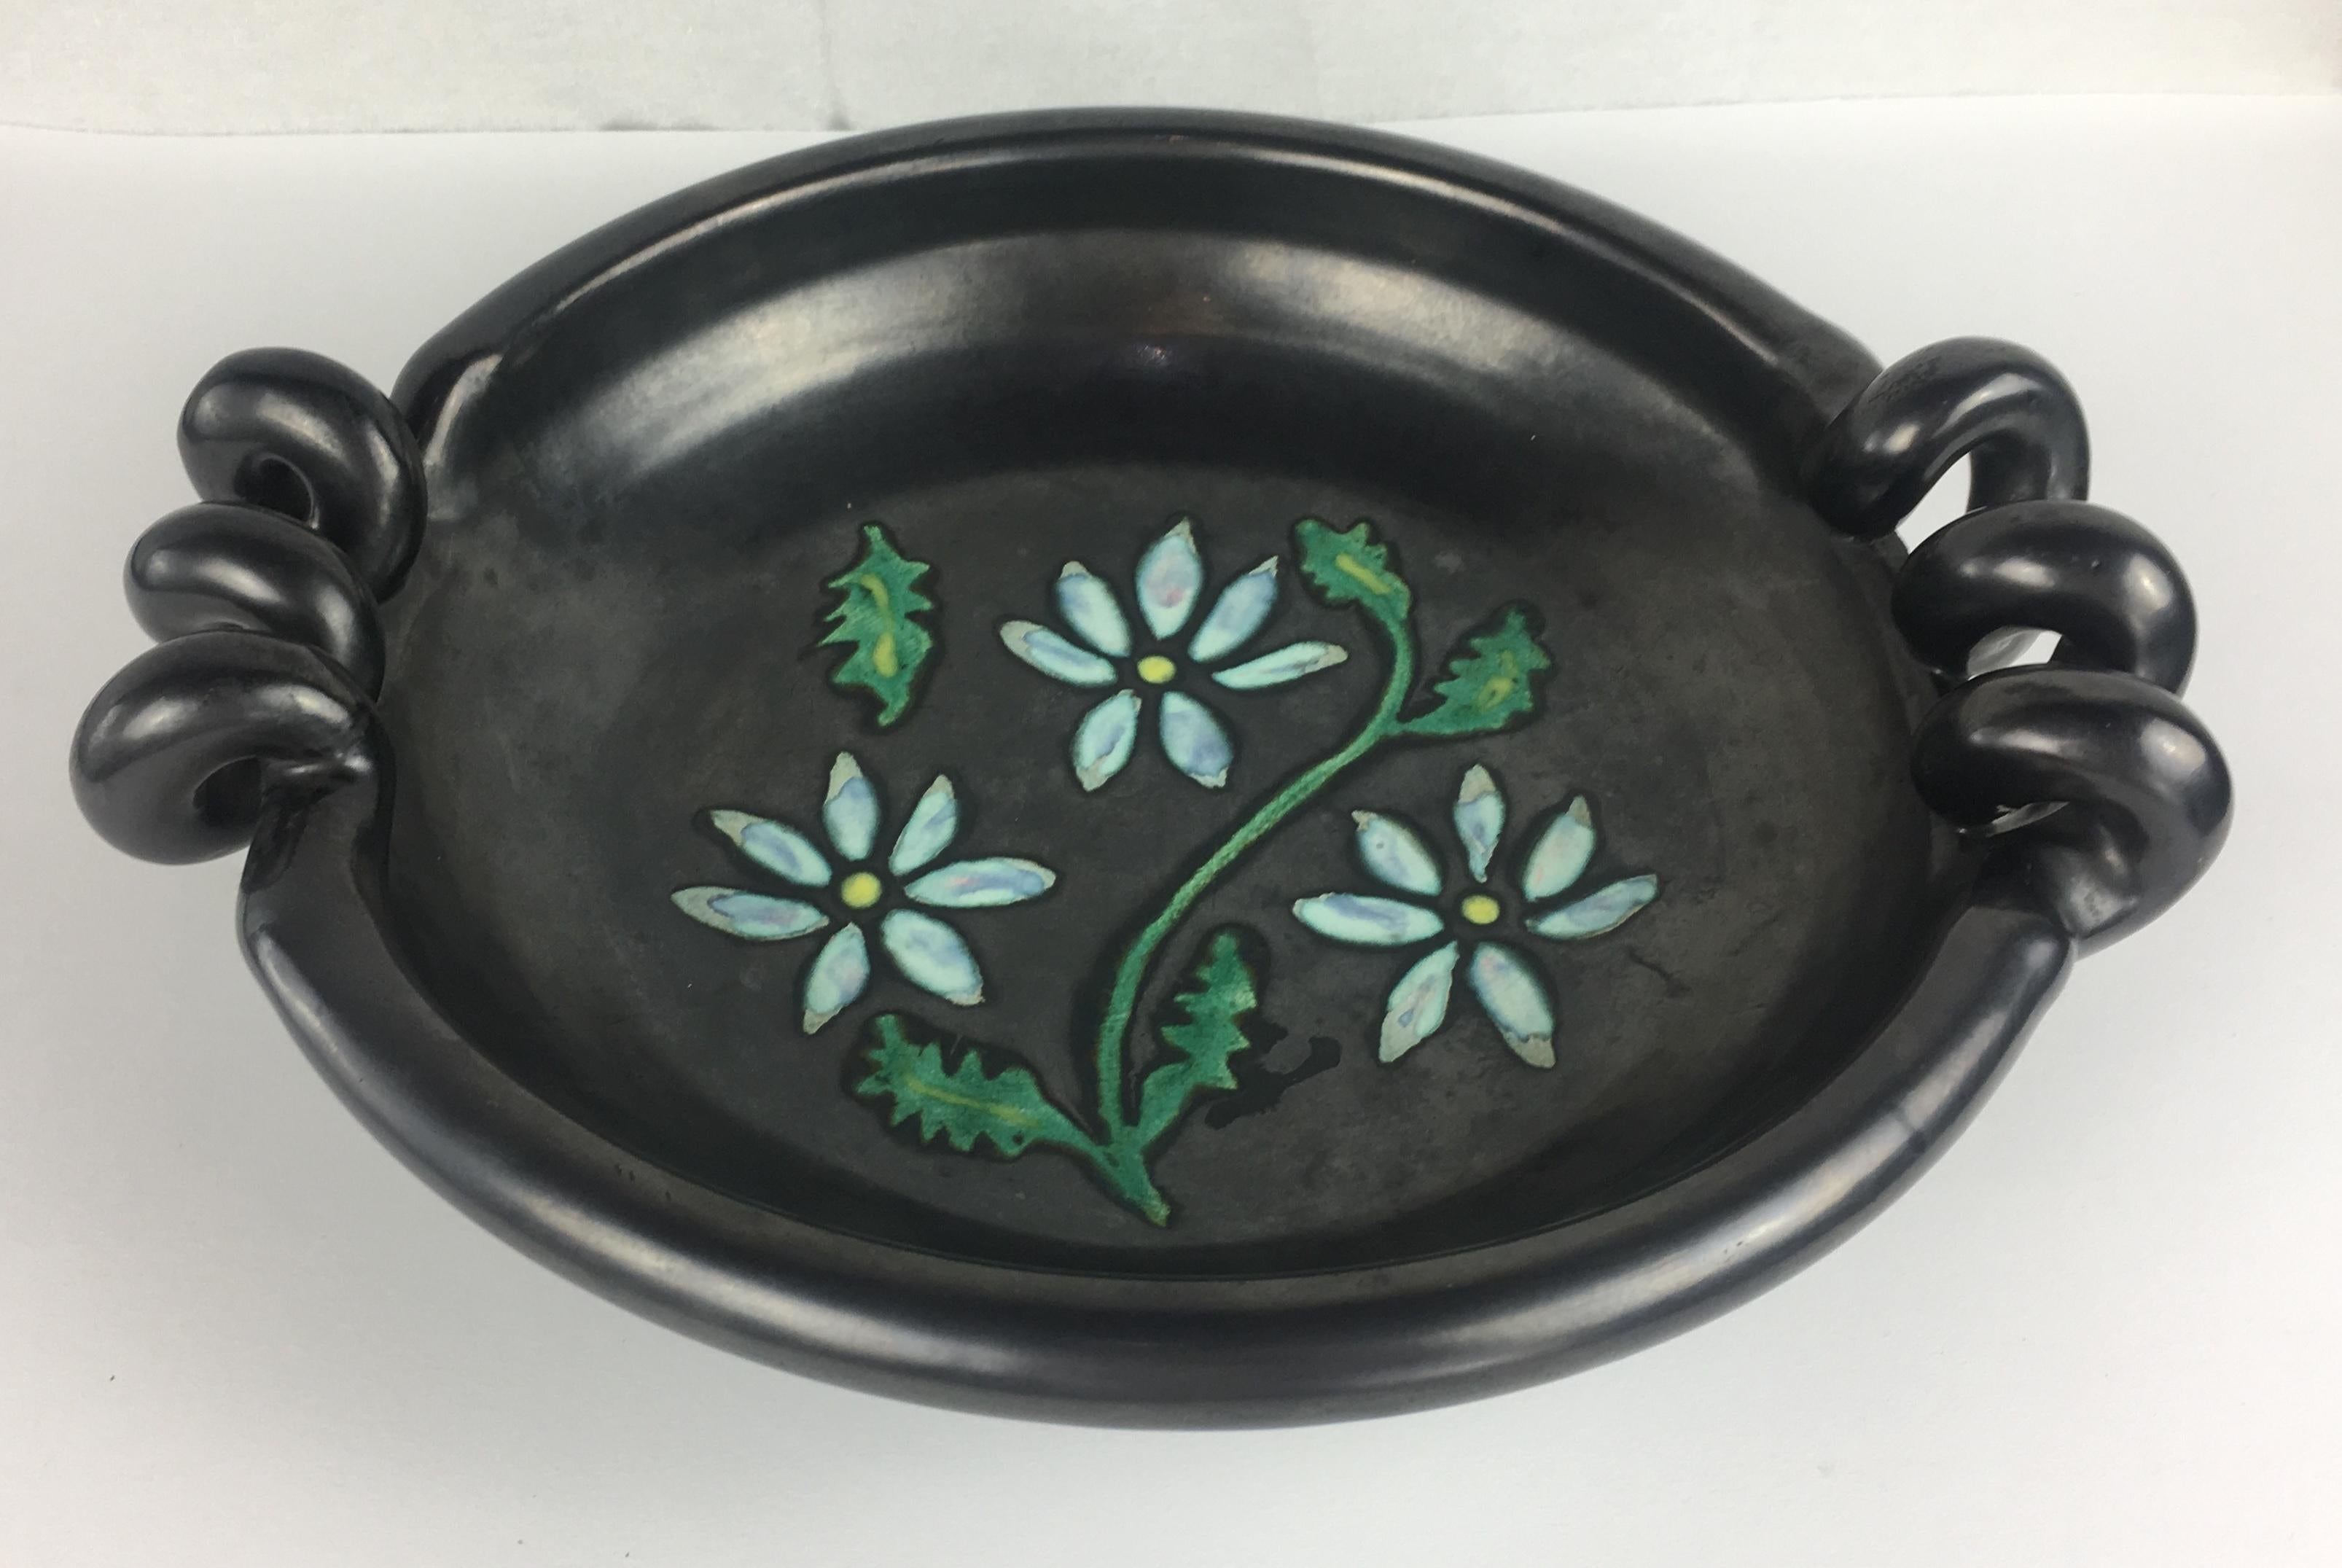 Midcentury sculptural bowl with a very nice black matte finish with floral design in the center and rope style handles. Signed and most likely from Vallauris.

This interesting semi-glazed piece will look good on any coffee table or countertop. It